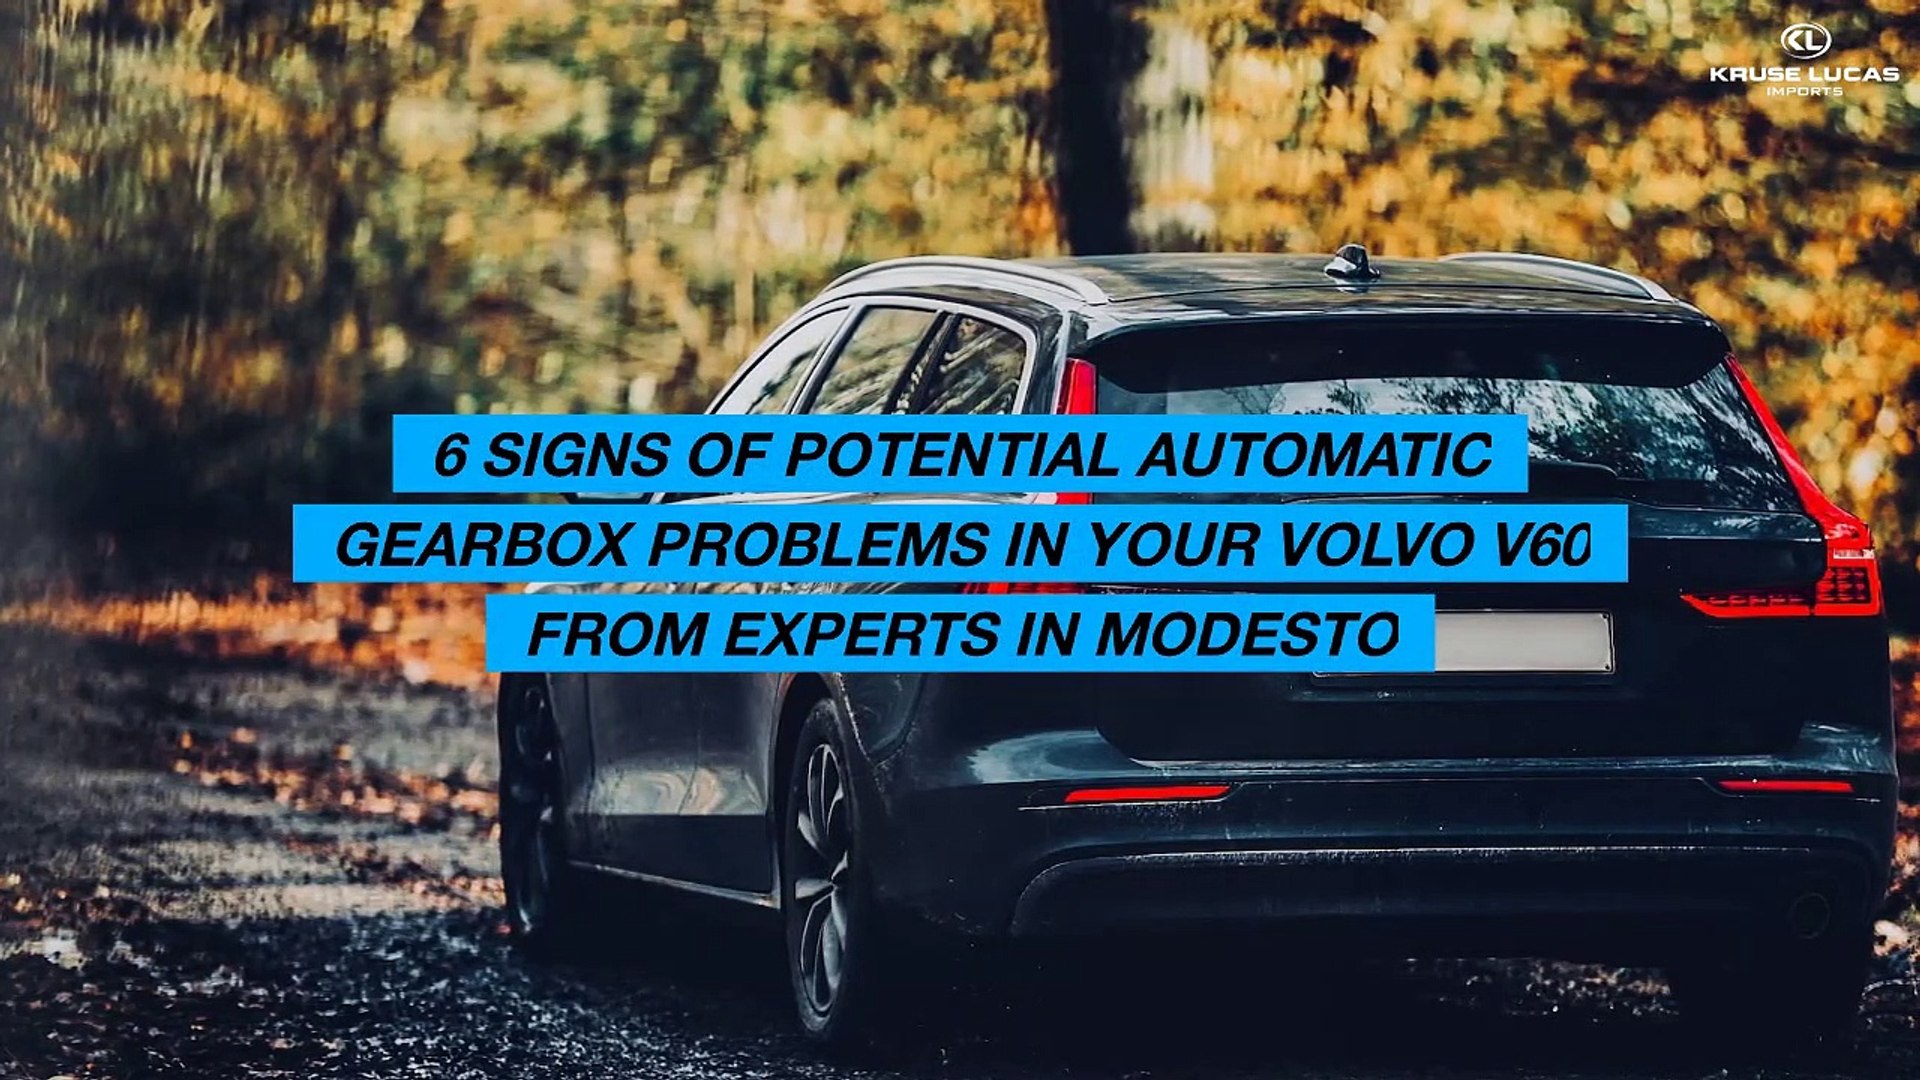 tafereel doen alsof achterzijde 6 Signs Of Potential Automatic Gearbox Problems In Your Volvo V60 From  Experts in Modesto - video Dailymotion